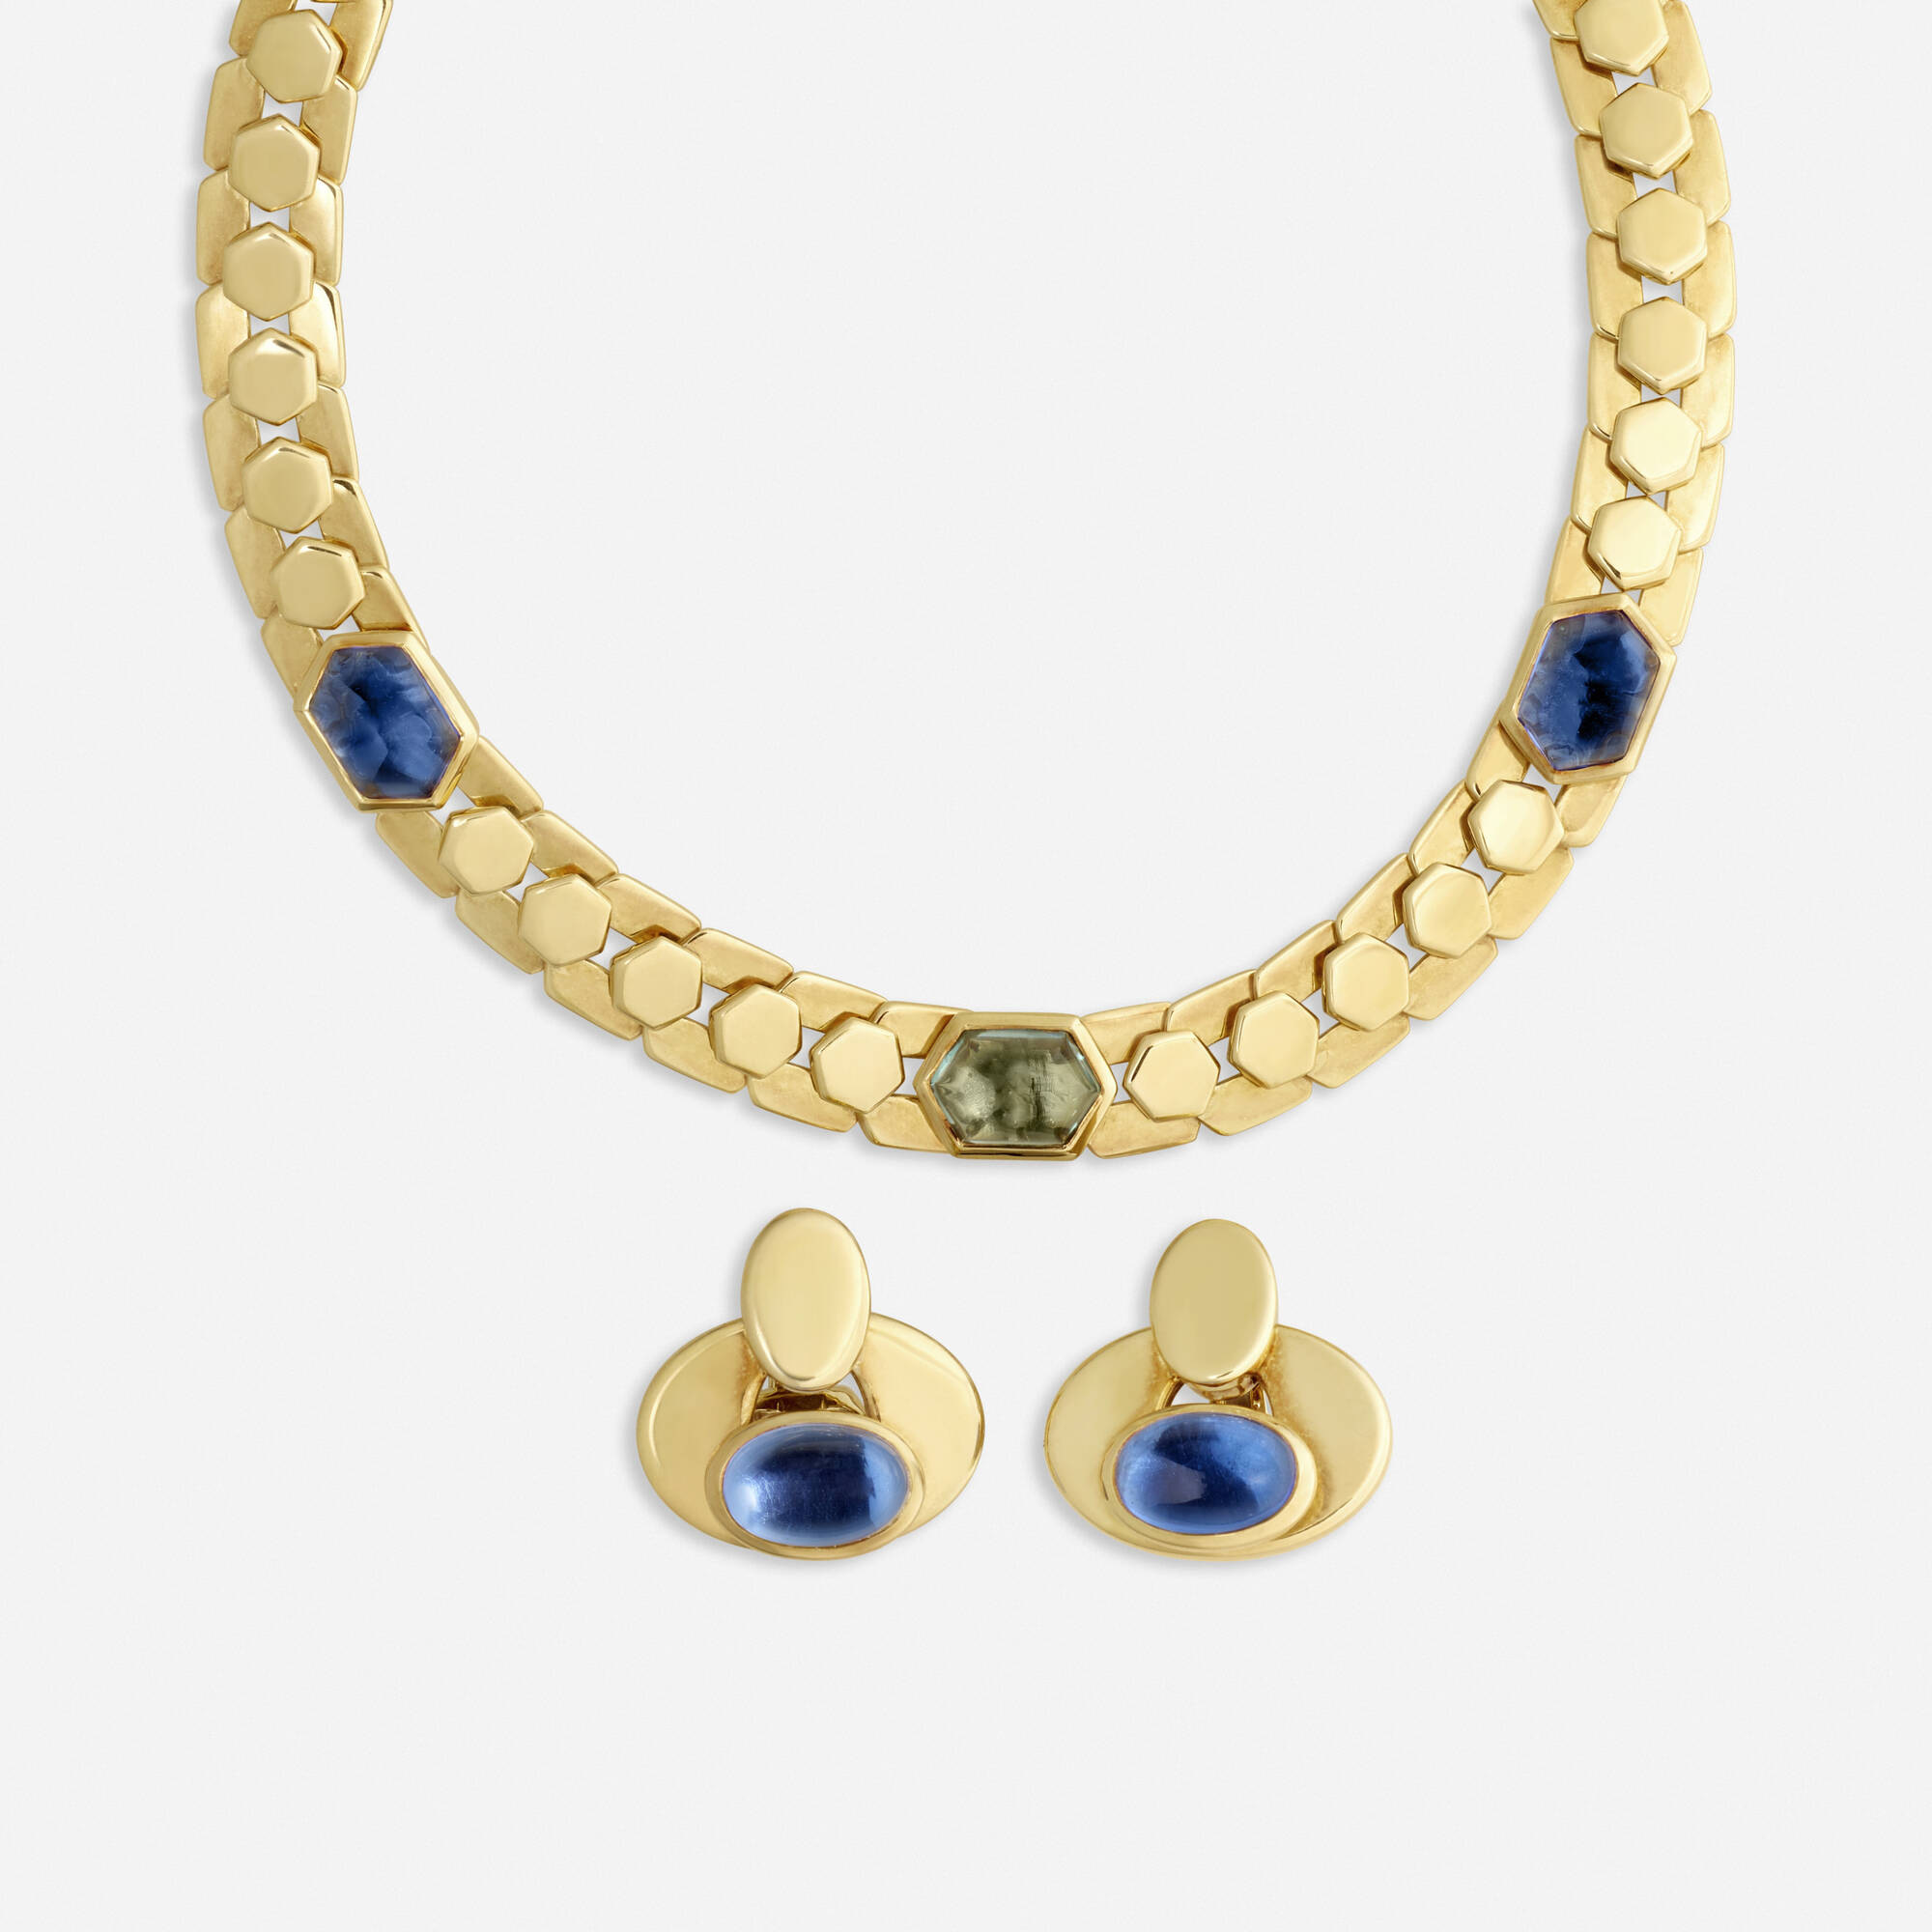 306: MARINA B, Necklace and earrings suite < Fall Jewelry & Watches, 6  October 2020 < Auctions | Rago Auctions